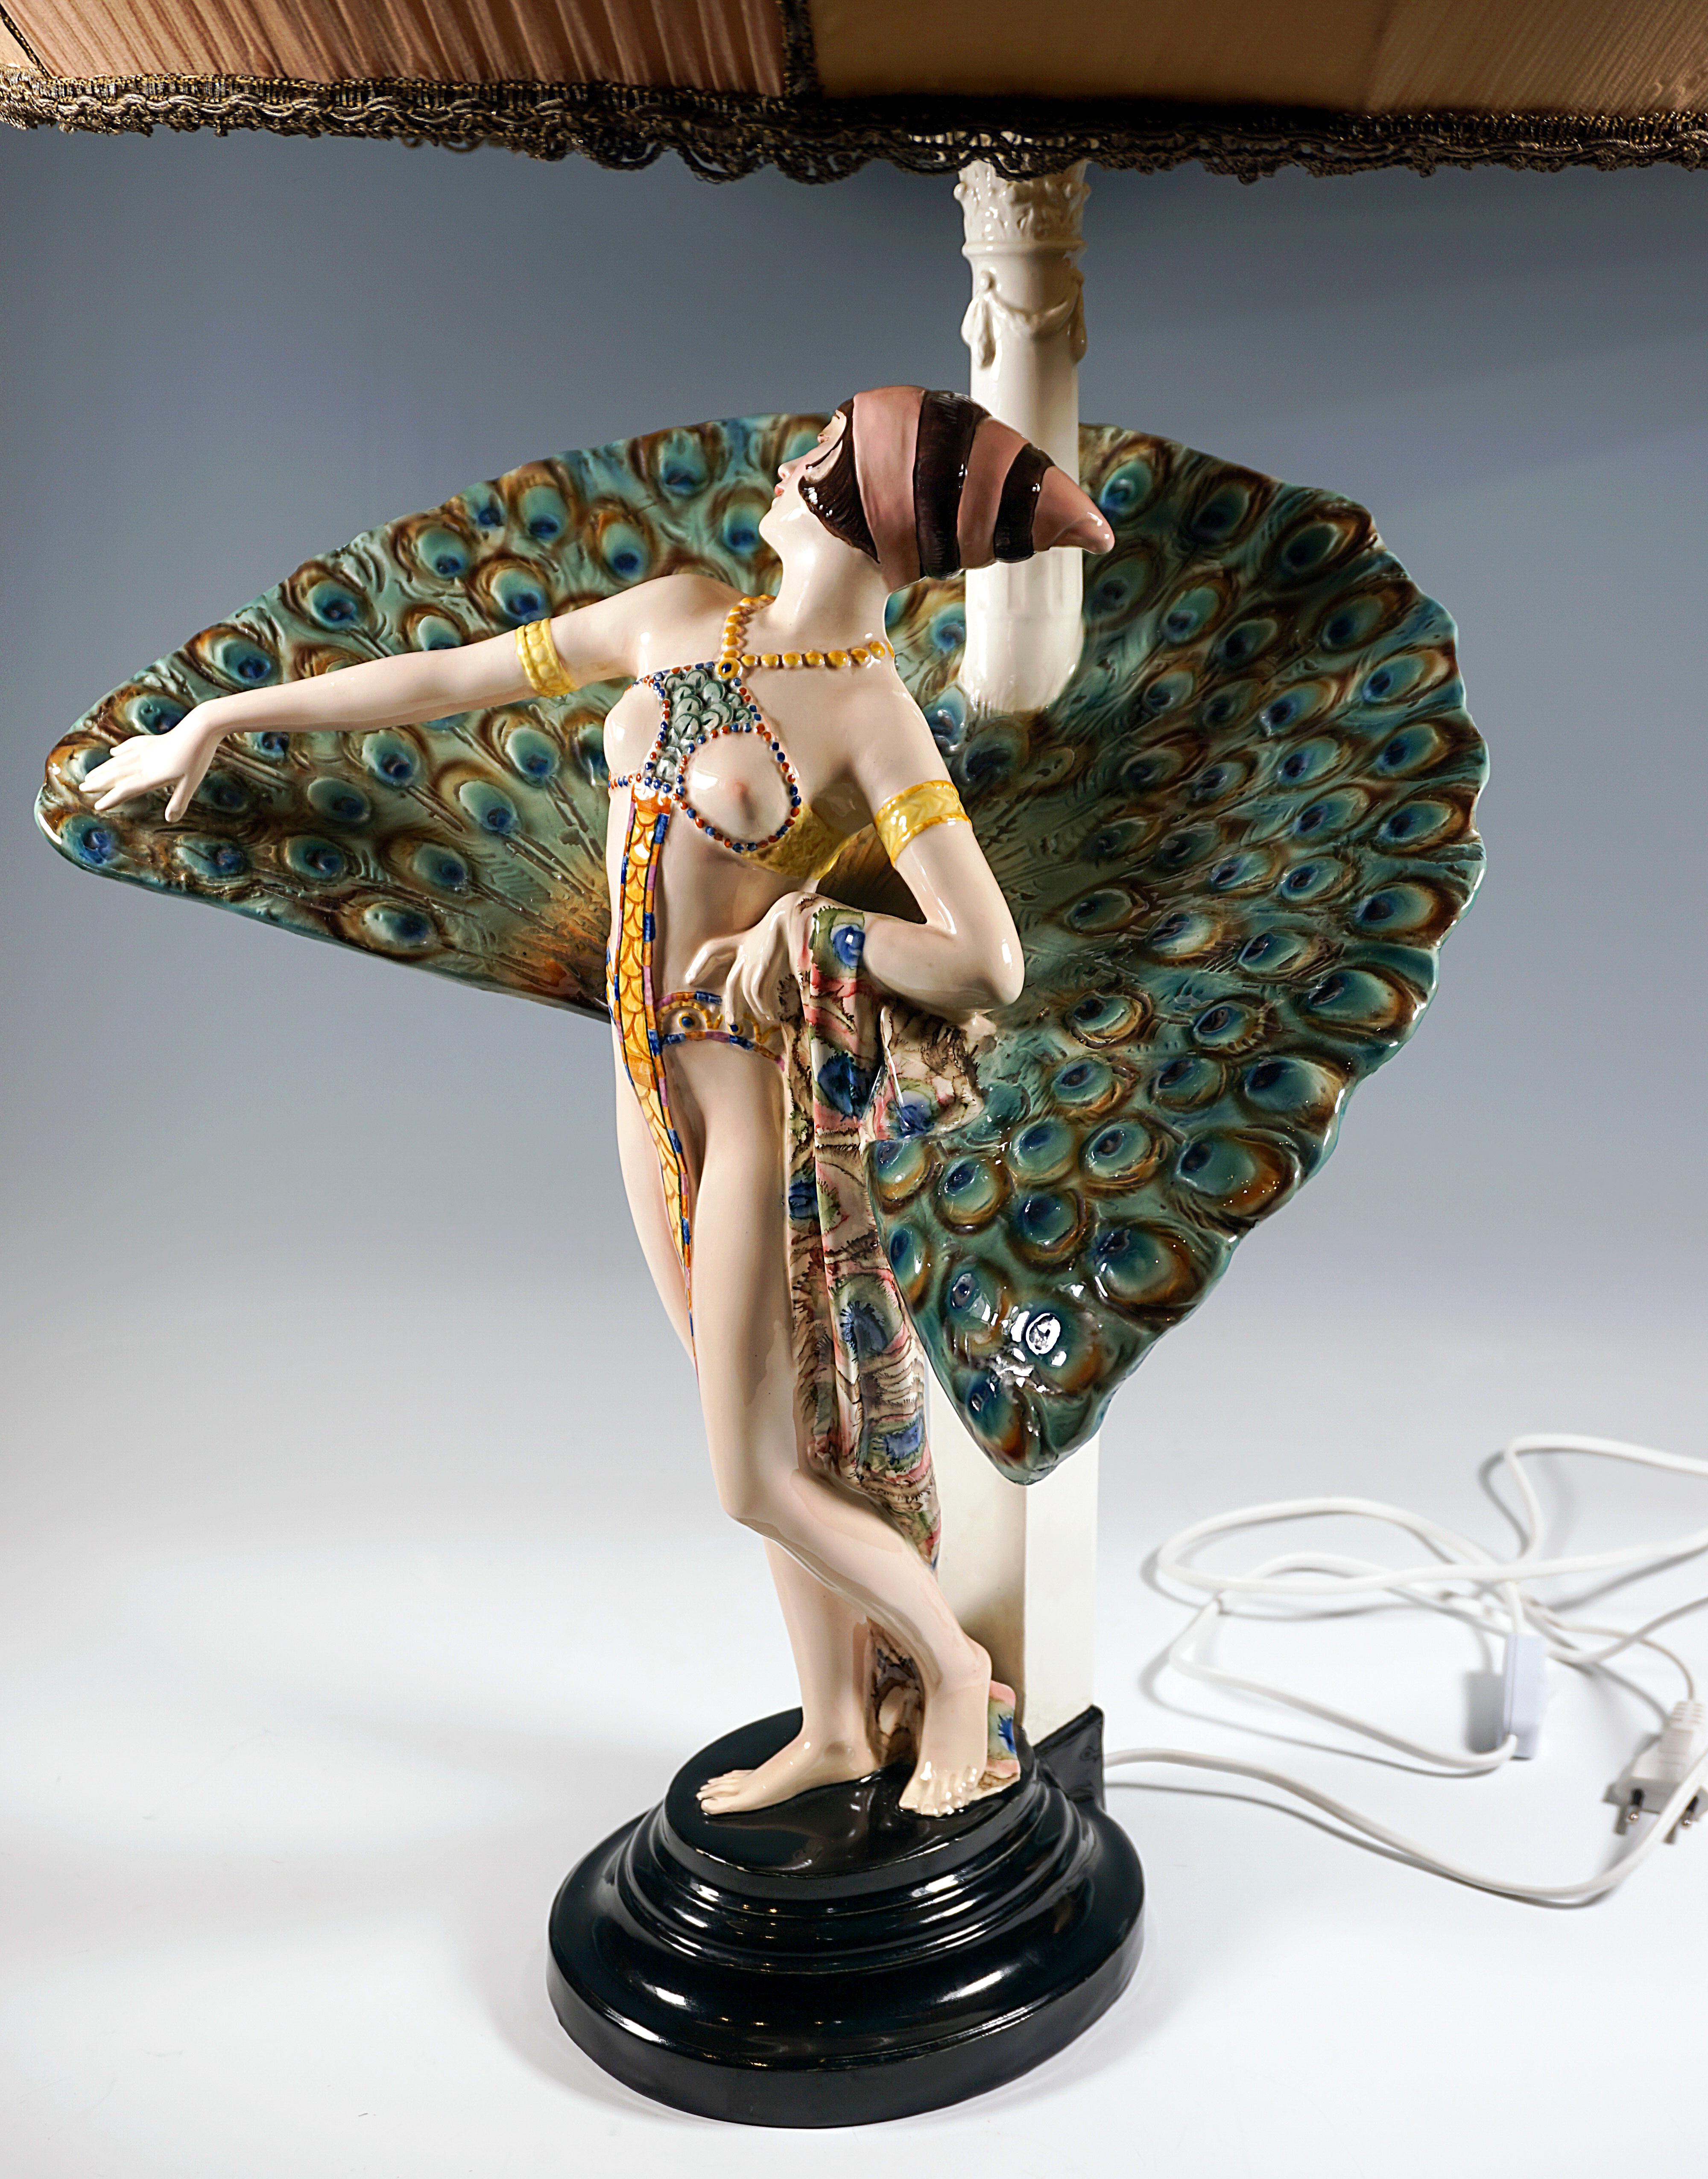 Early 20th Century Goldscheider Vienna Art-Déco Figure & Lamp, 'Peacock Dancer', by Paul Philippe